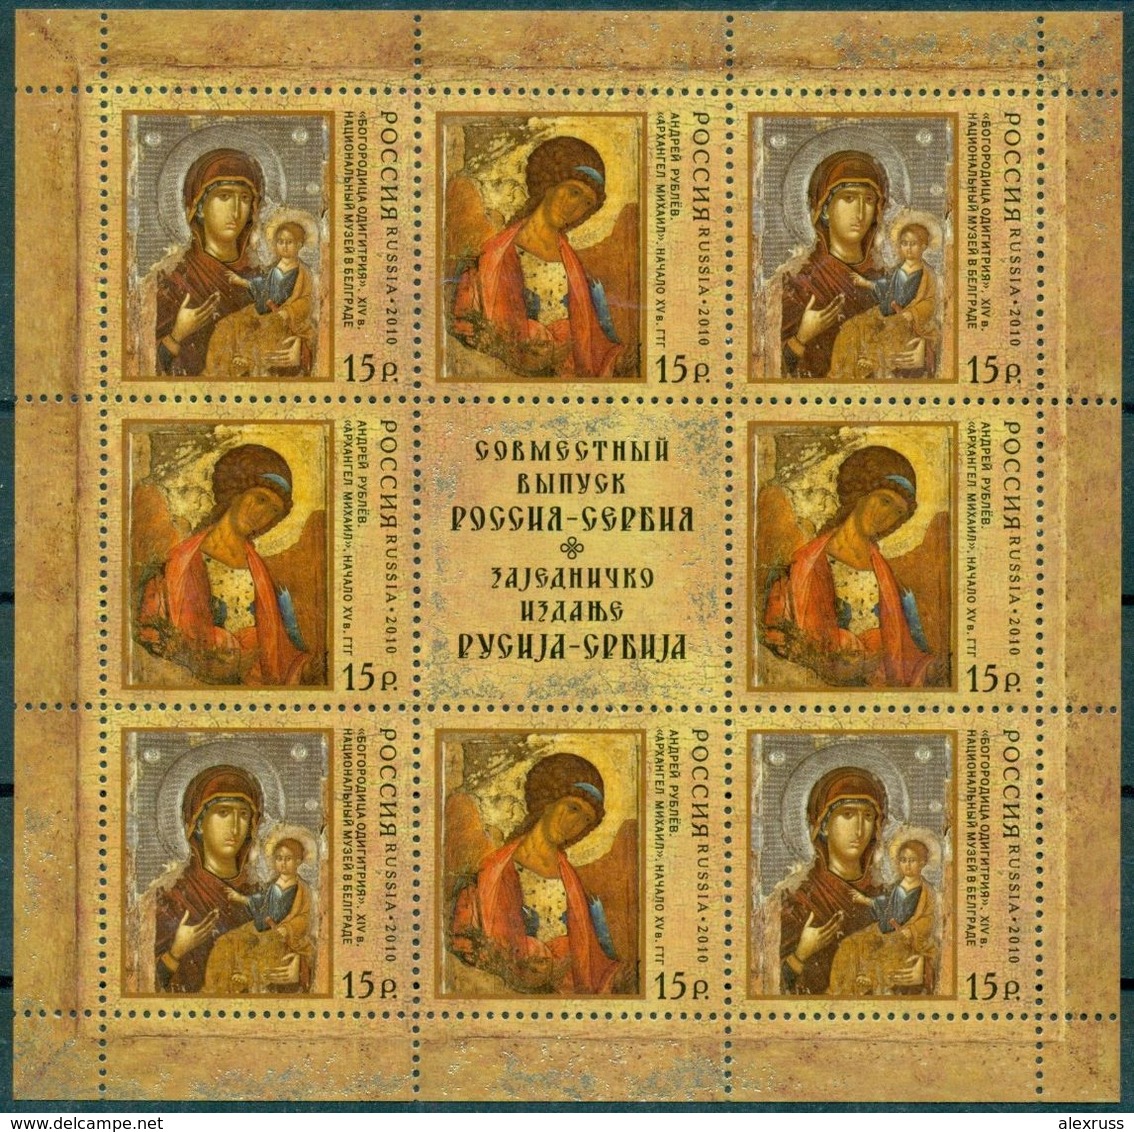 Russia 2010,Miniature Sheet Join Issue W/Serbia,Art Religious Icons Of Russia & Serbia,Scott # 7221,VF MNH** (OR-3) - Unused Stamps